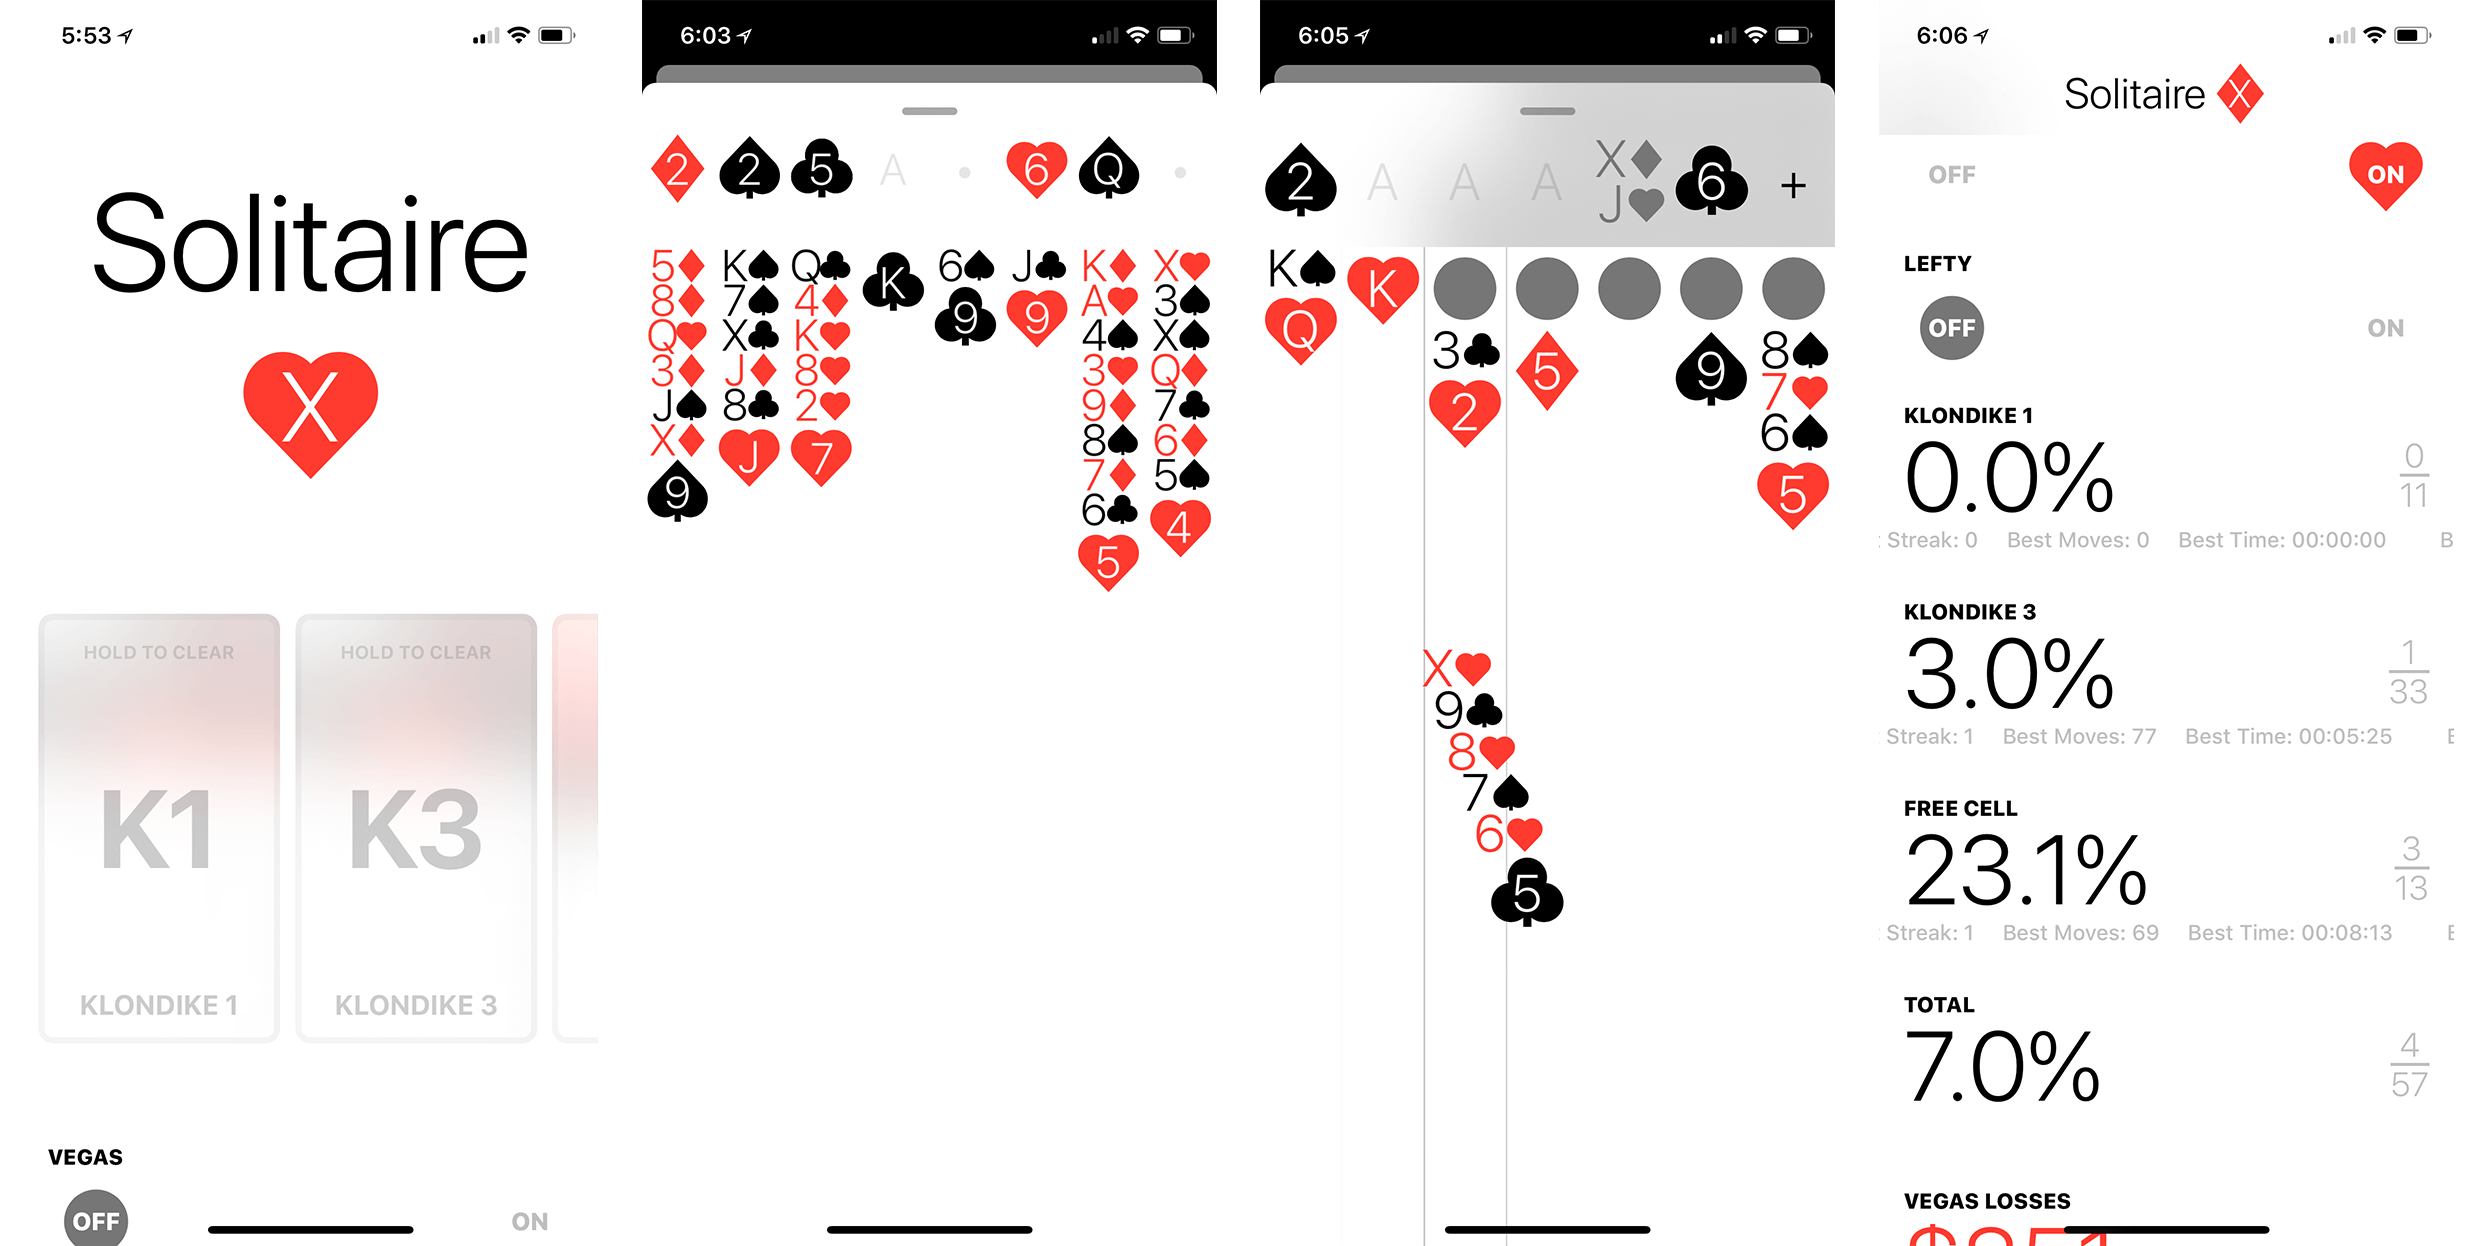 A screenshot from Solitaire X